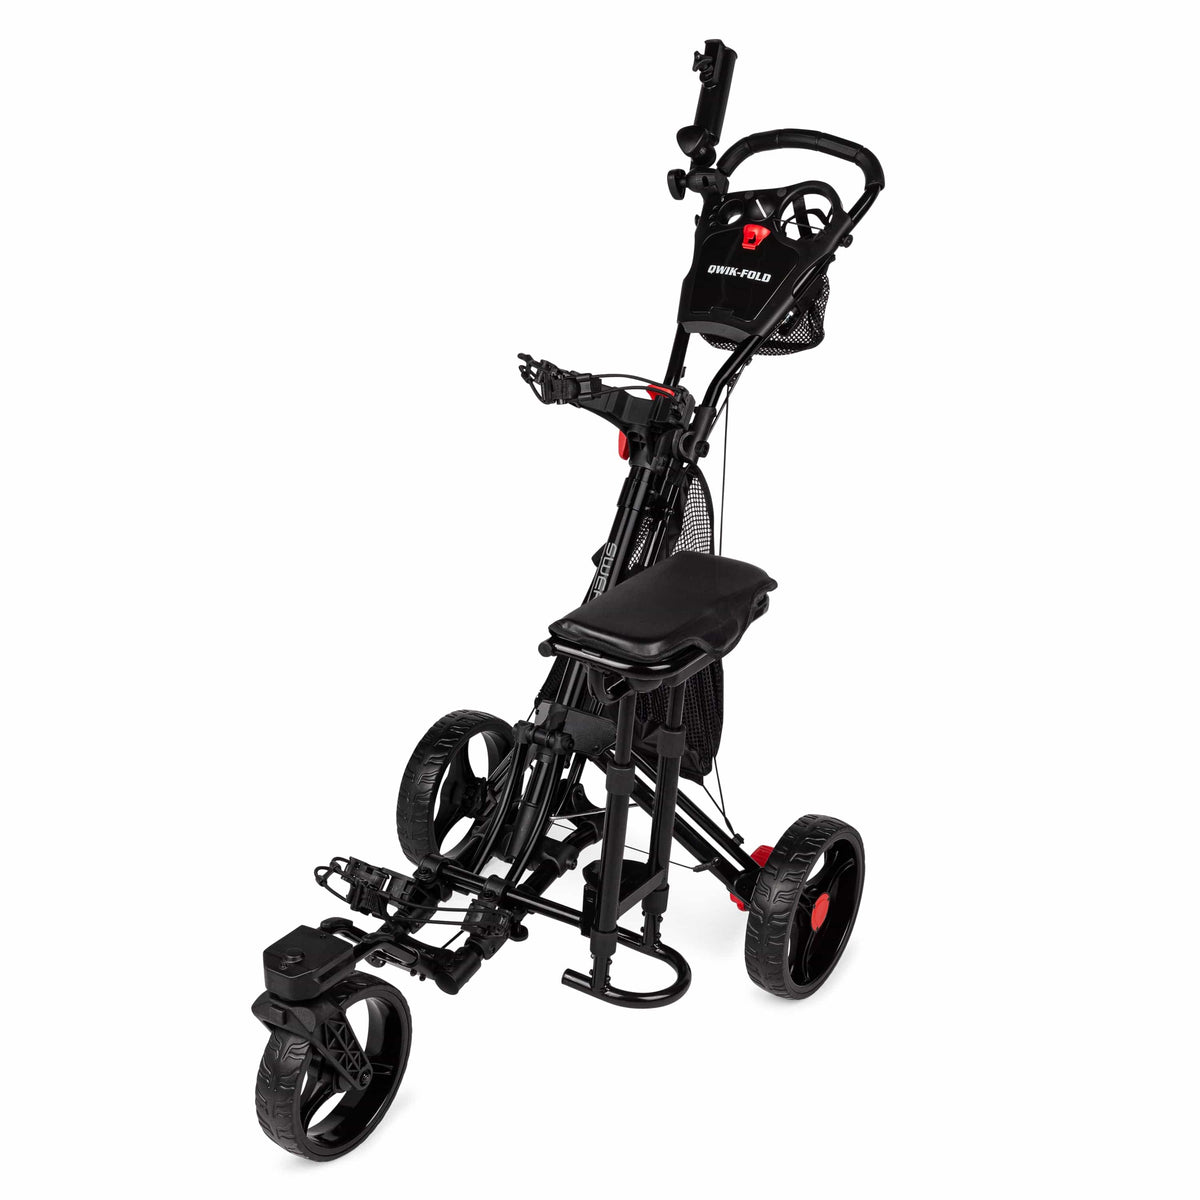 Founders Club Swerve 360 Golf Push Cart Seat (Seat Only)